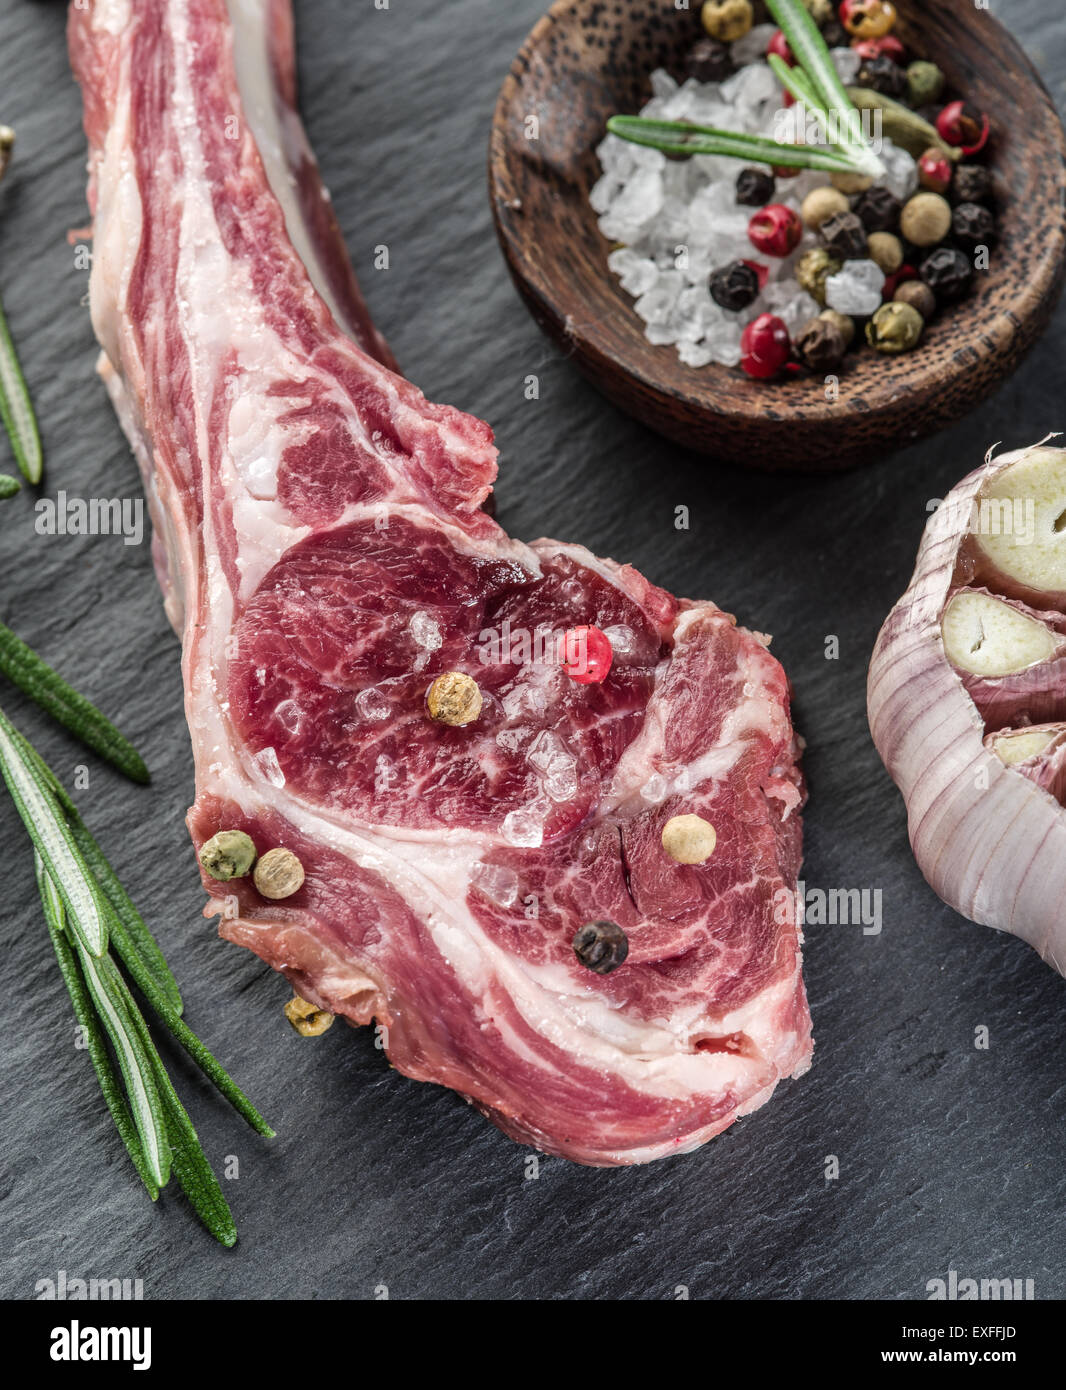 Raw lamb chops with garlic and herbs on the old wooden table. Stock Photo